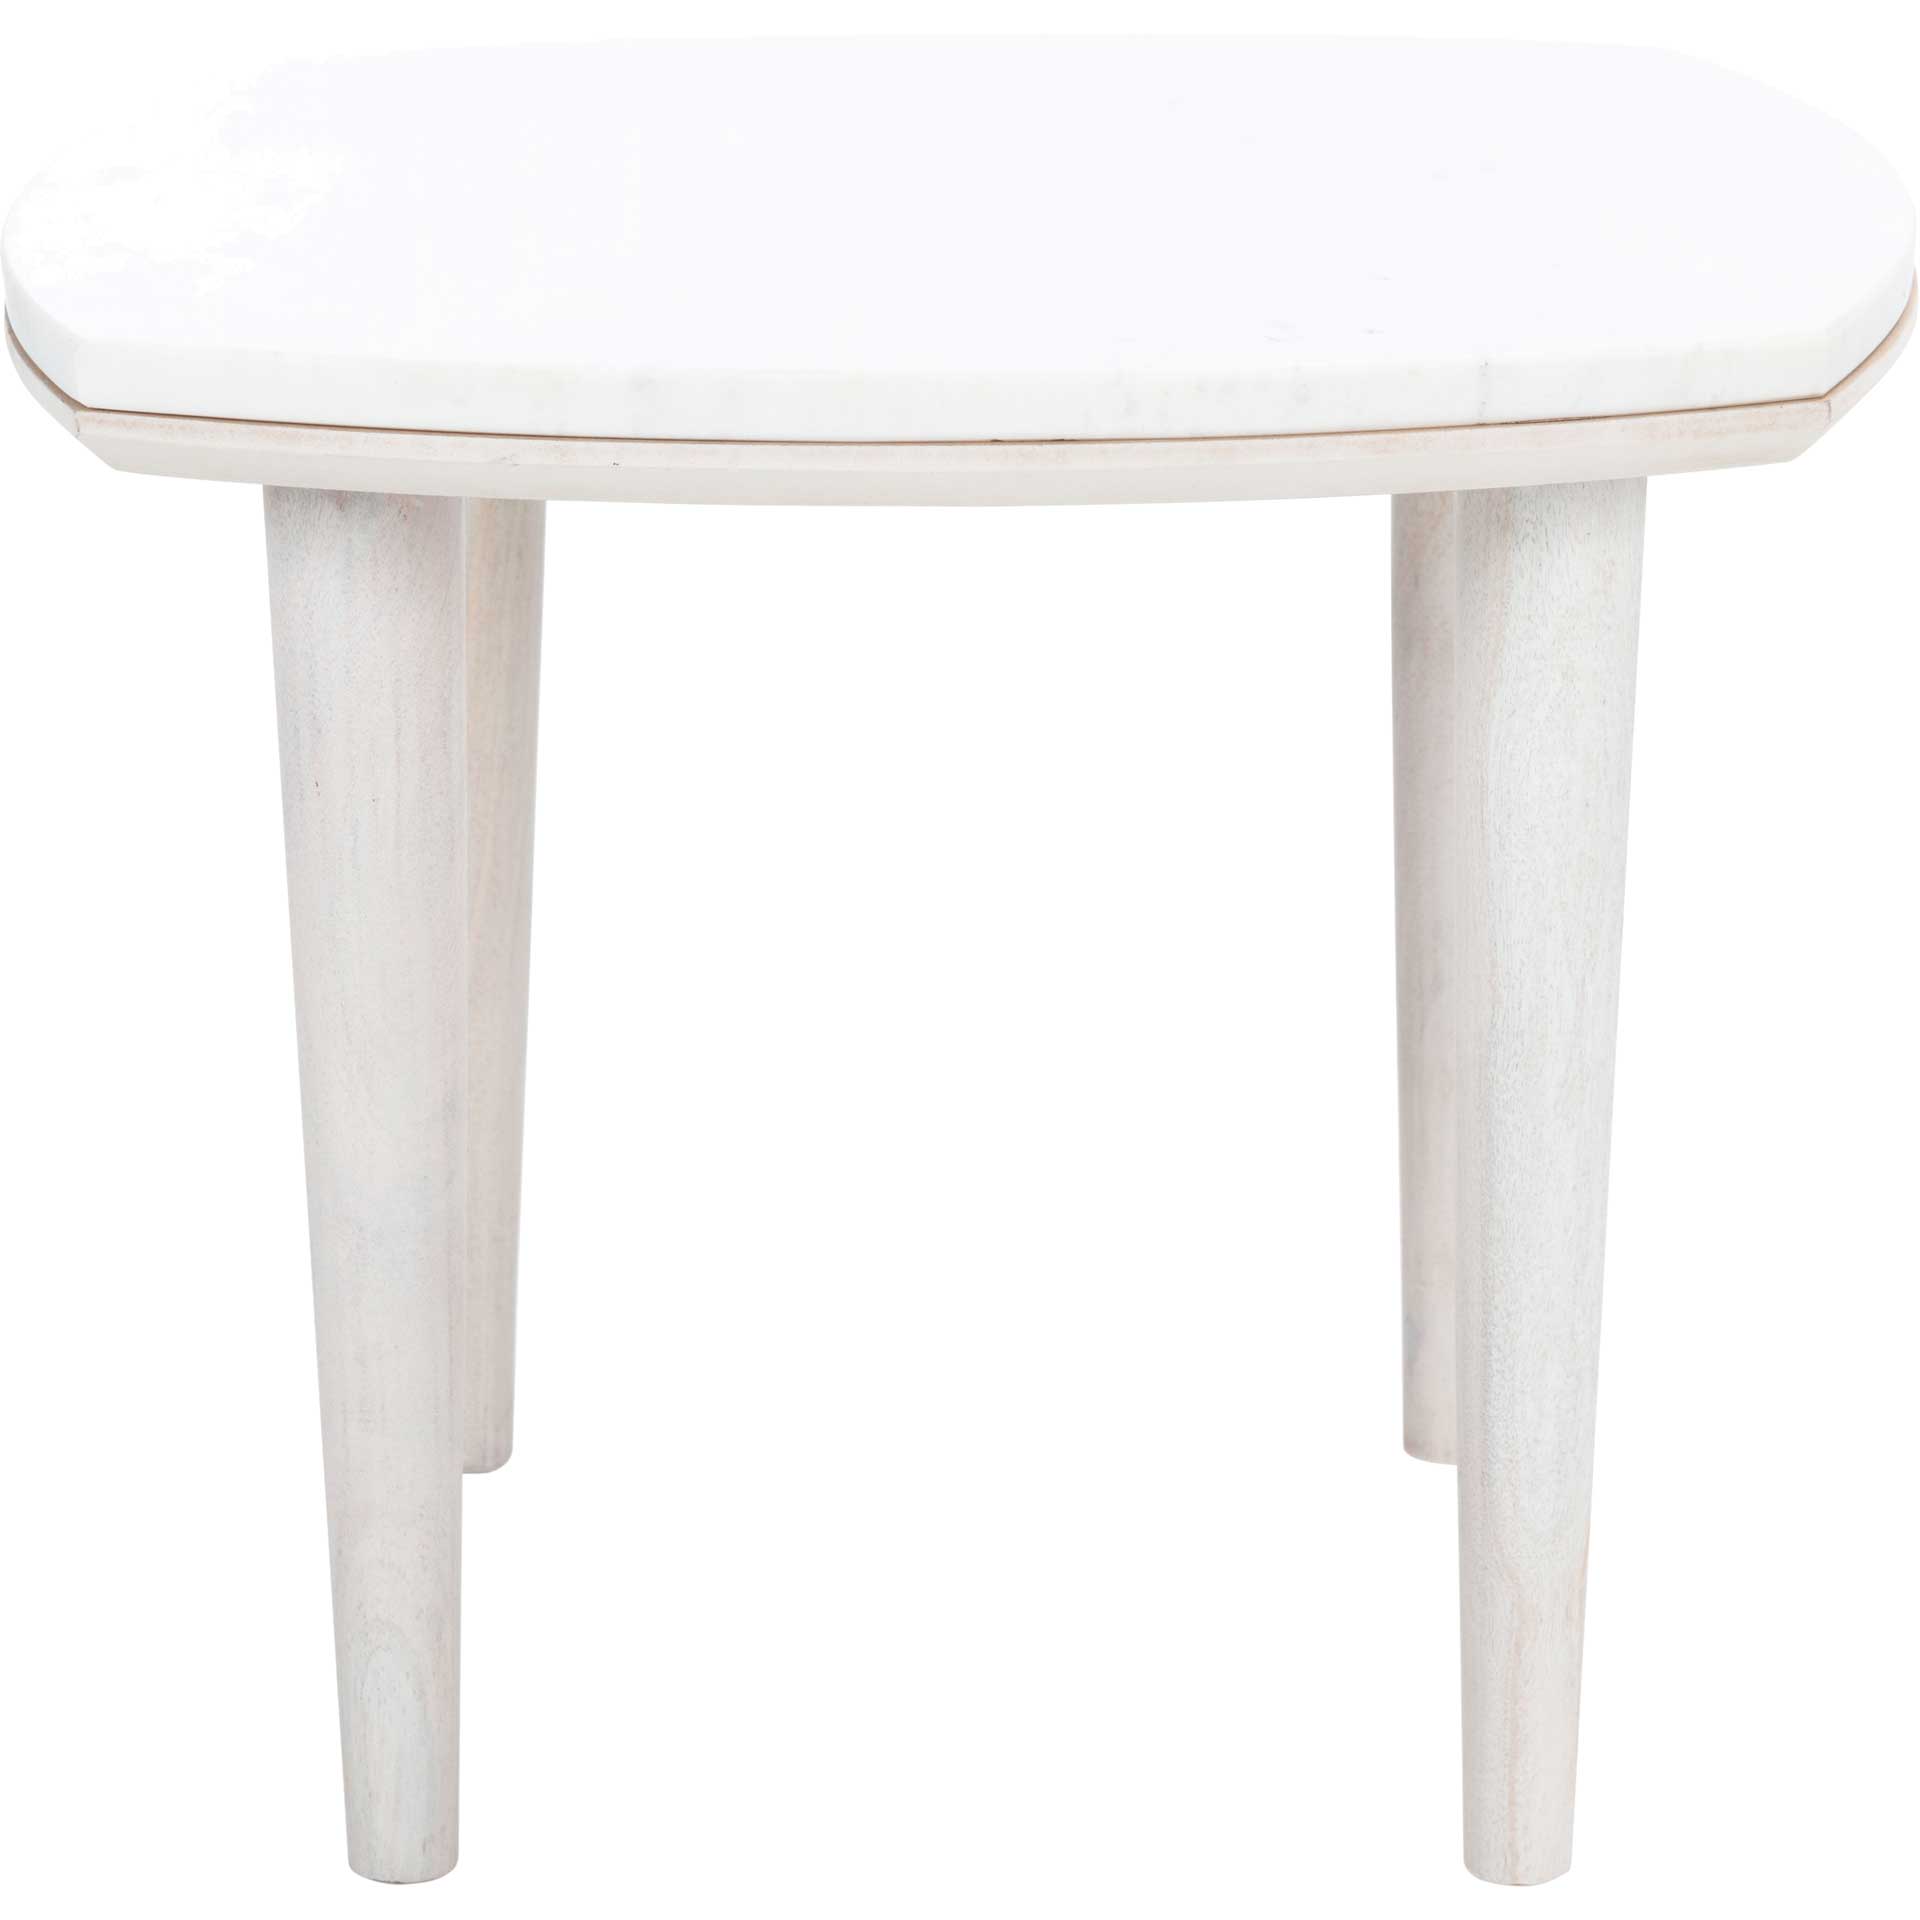 Larkspur Marble Side Table White Wash/White